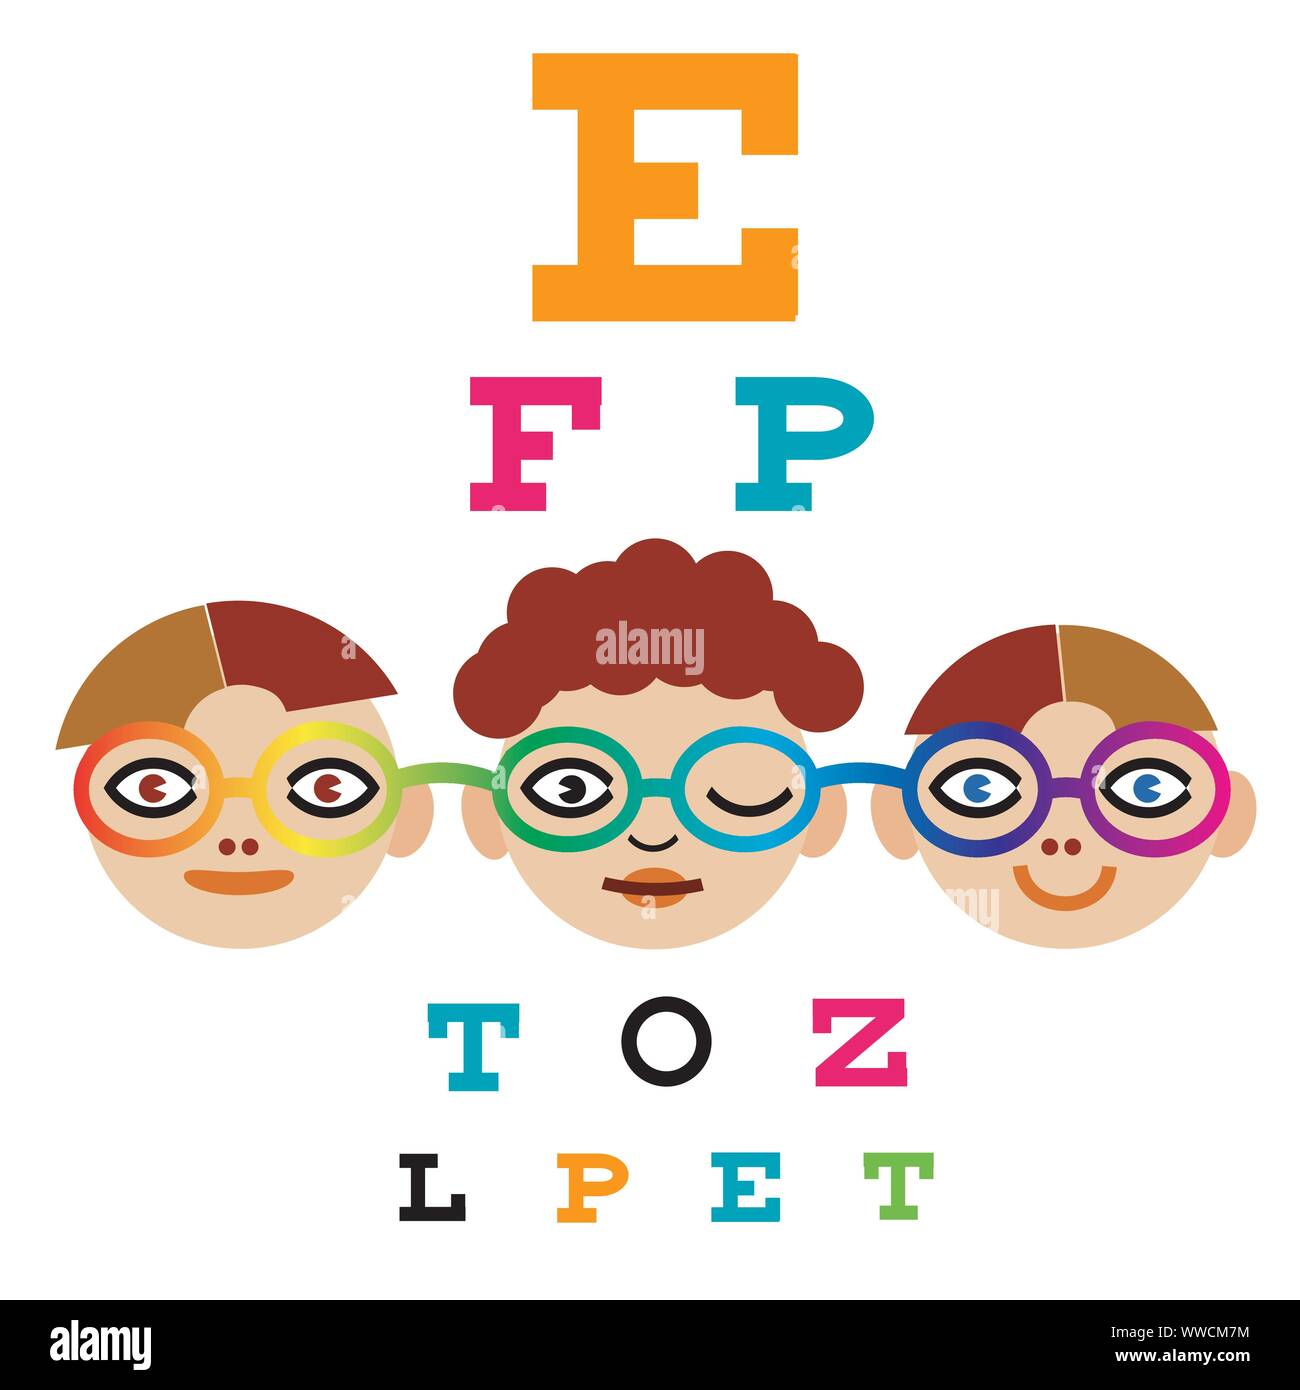 Gallery of Snellen Eye Chart Reinvented for Designers - 1